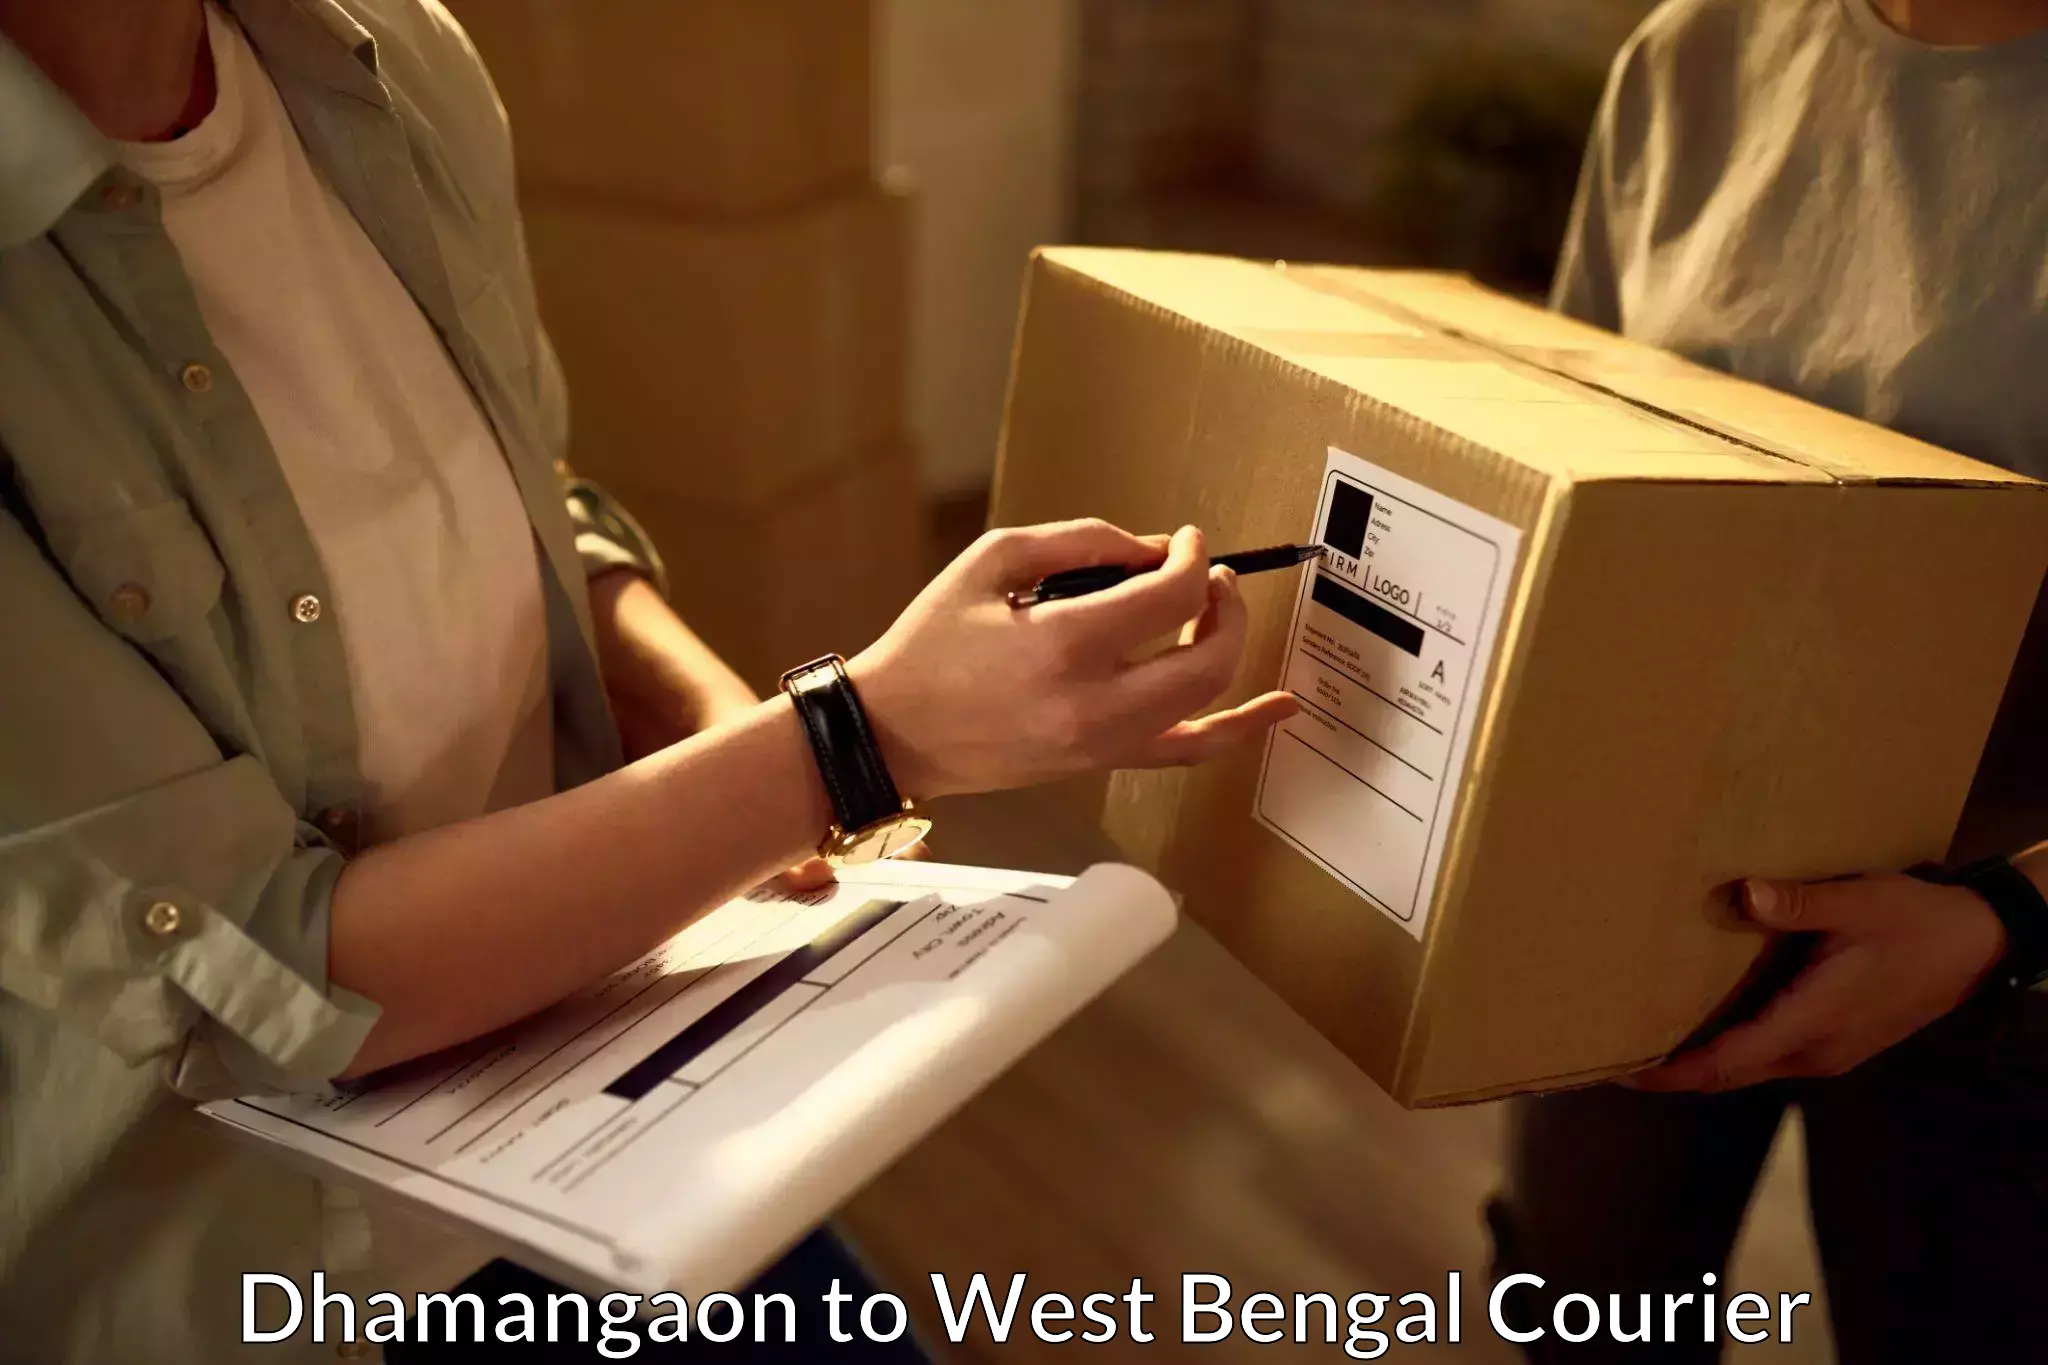 Weekend courier service Dhamangaon to Bagdogra